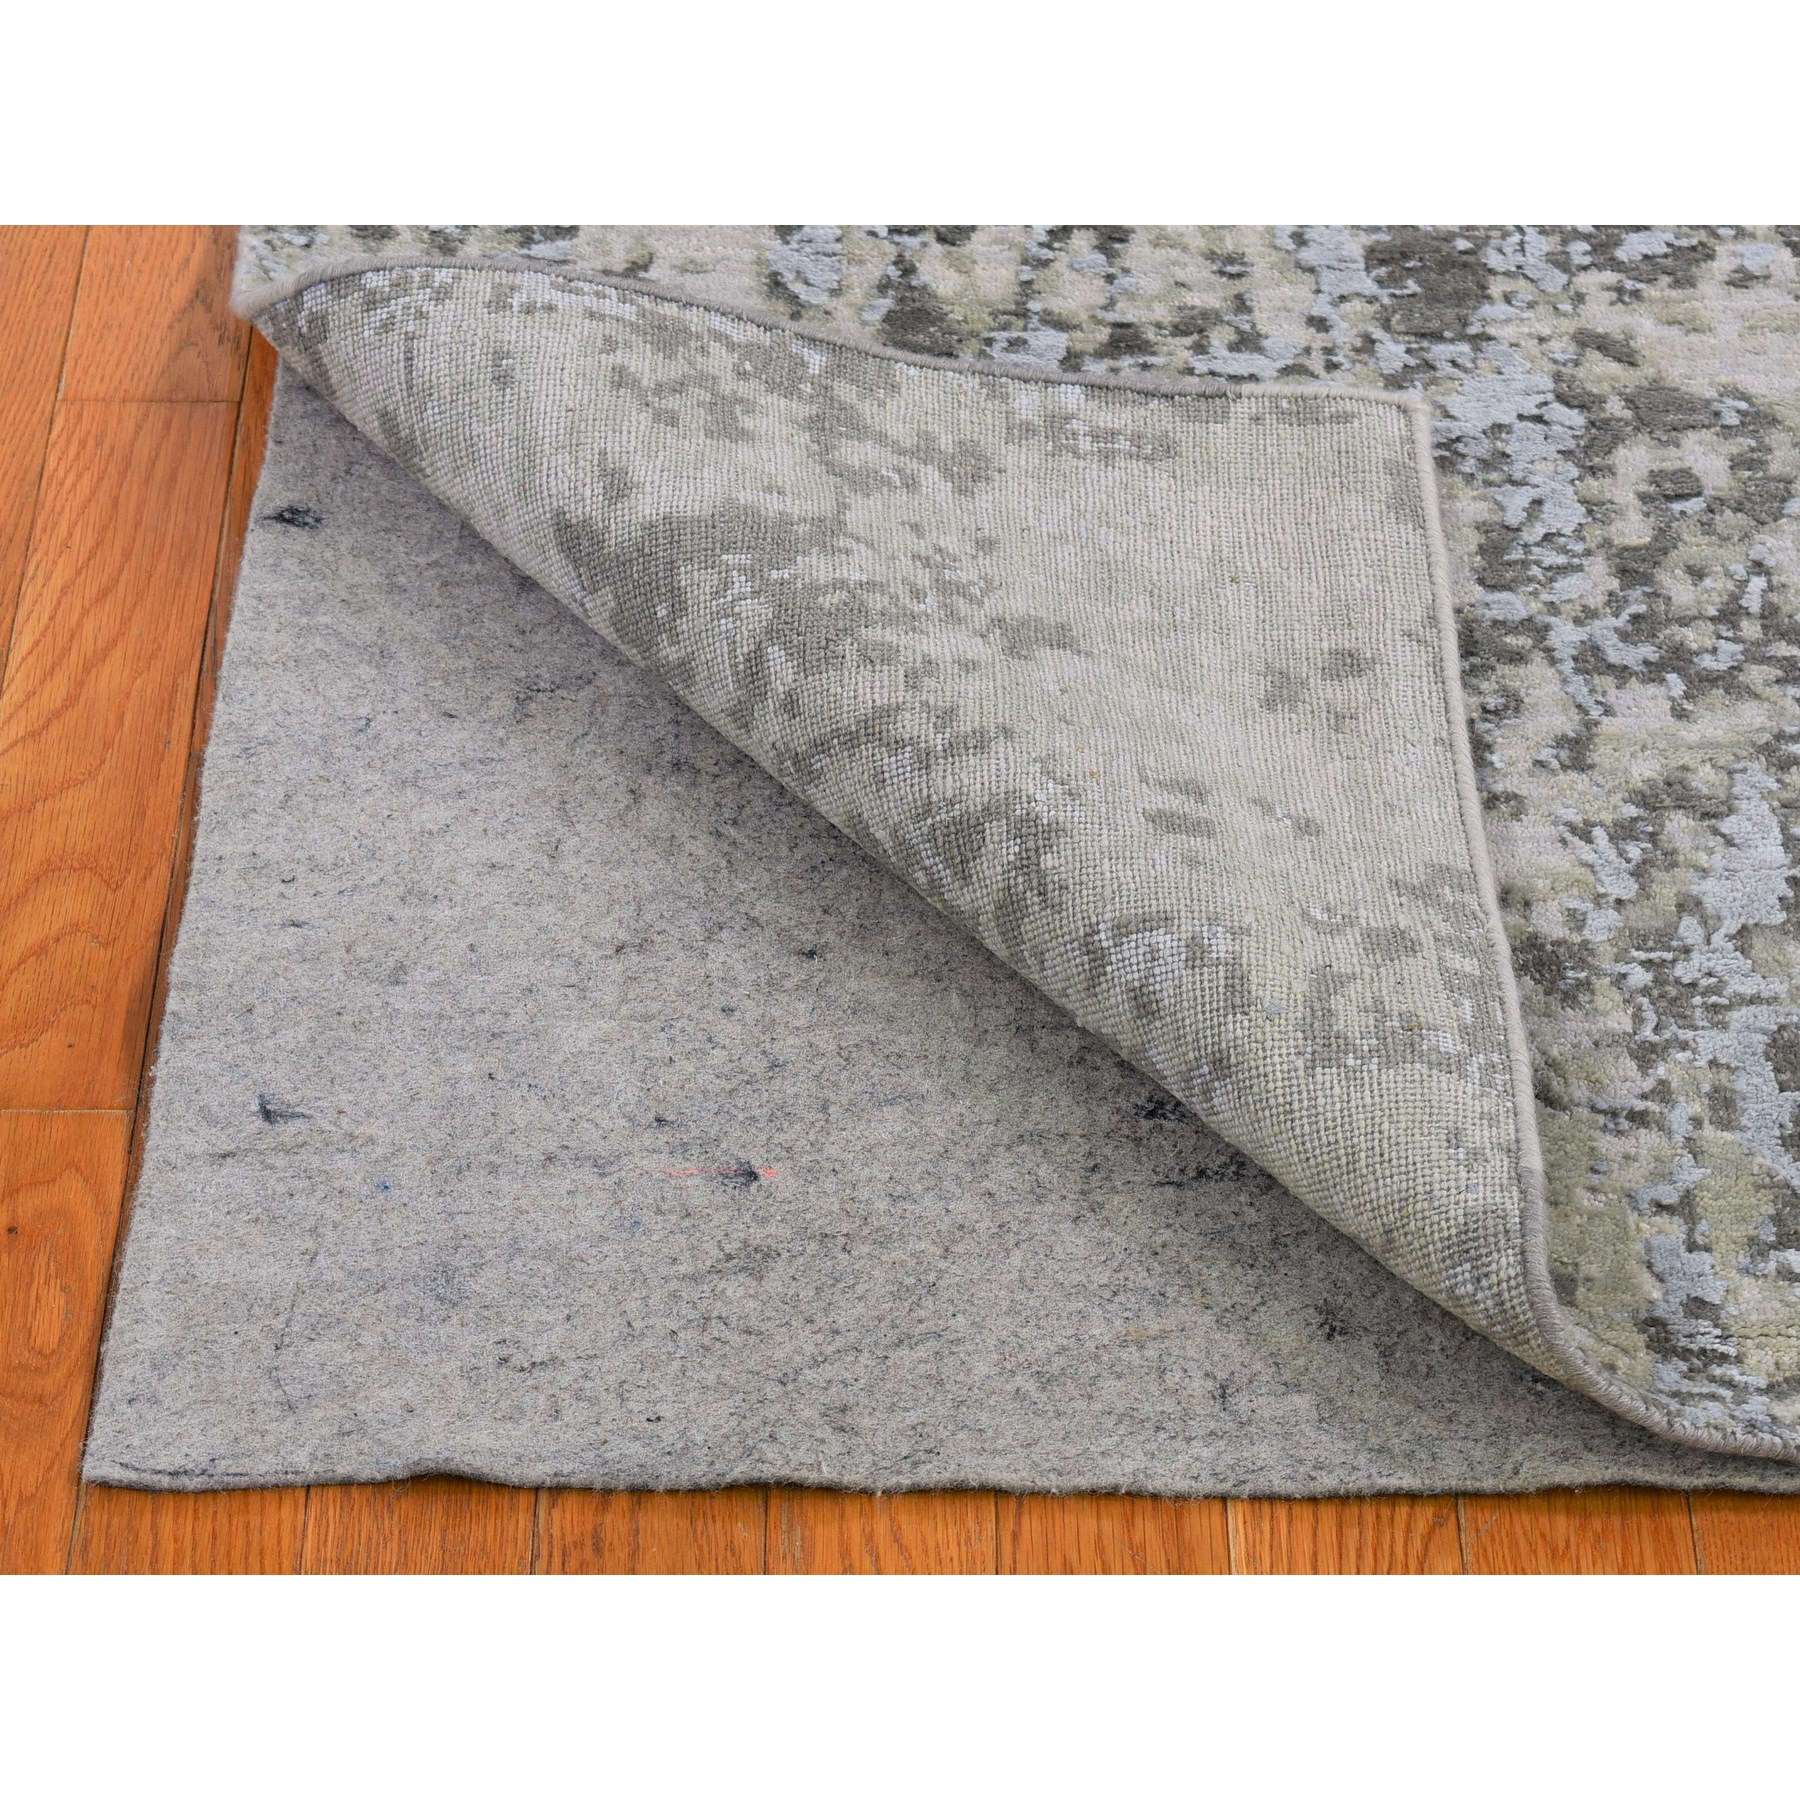 3'x5'2" Gray Persian Knot with Abstract Design Wool and Silk Denser Weave Hand Woven Oriental Rug 